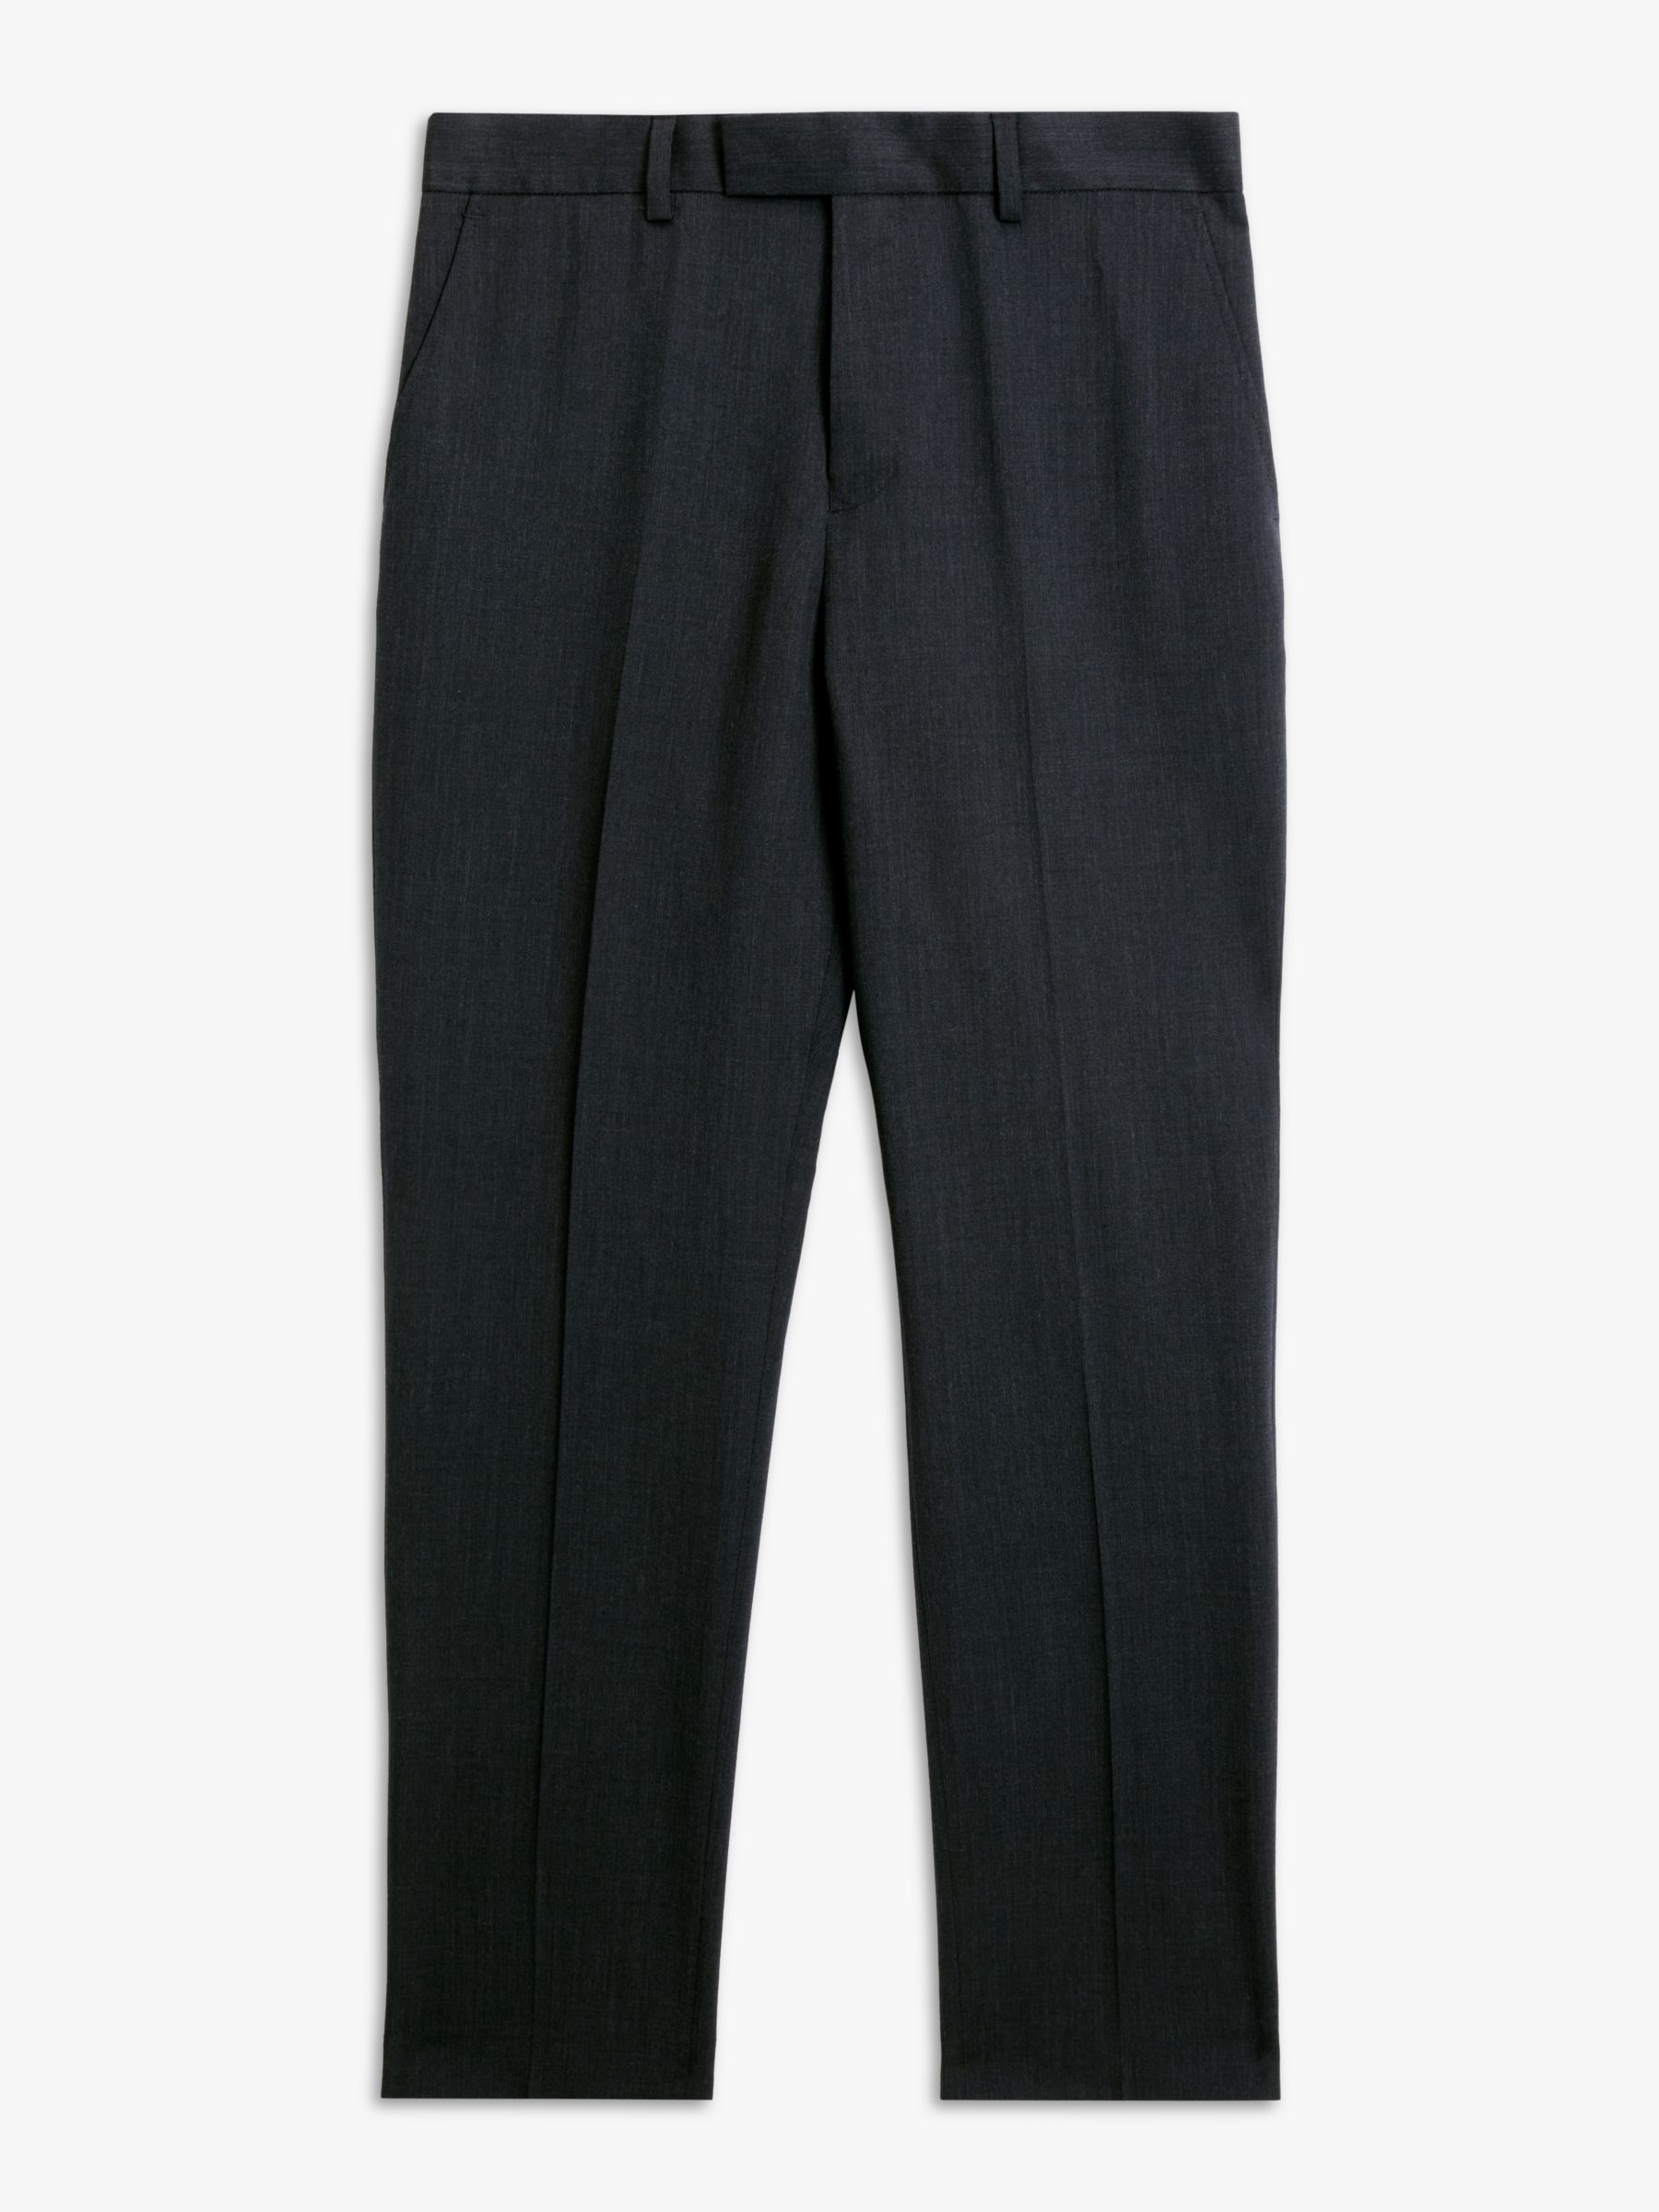 John Lewis Washable Wool Blend Regular Fit Suit Trousers, Charcoal, 30R